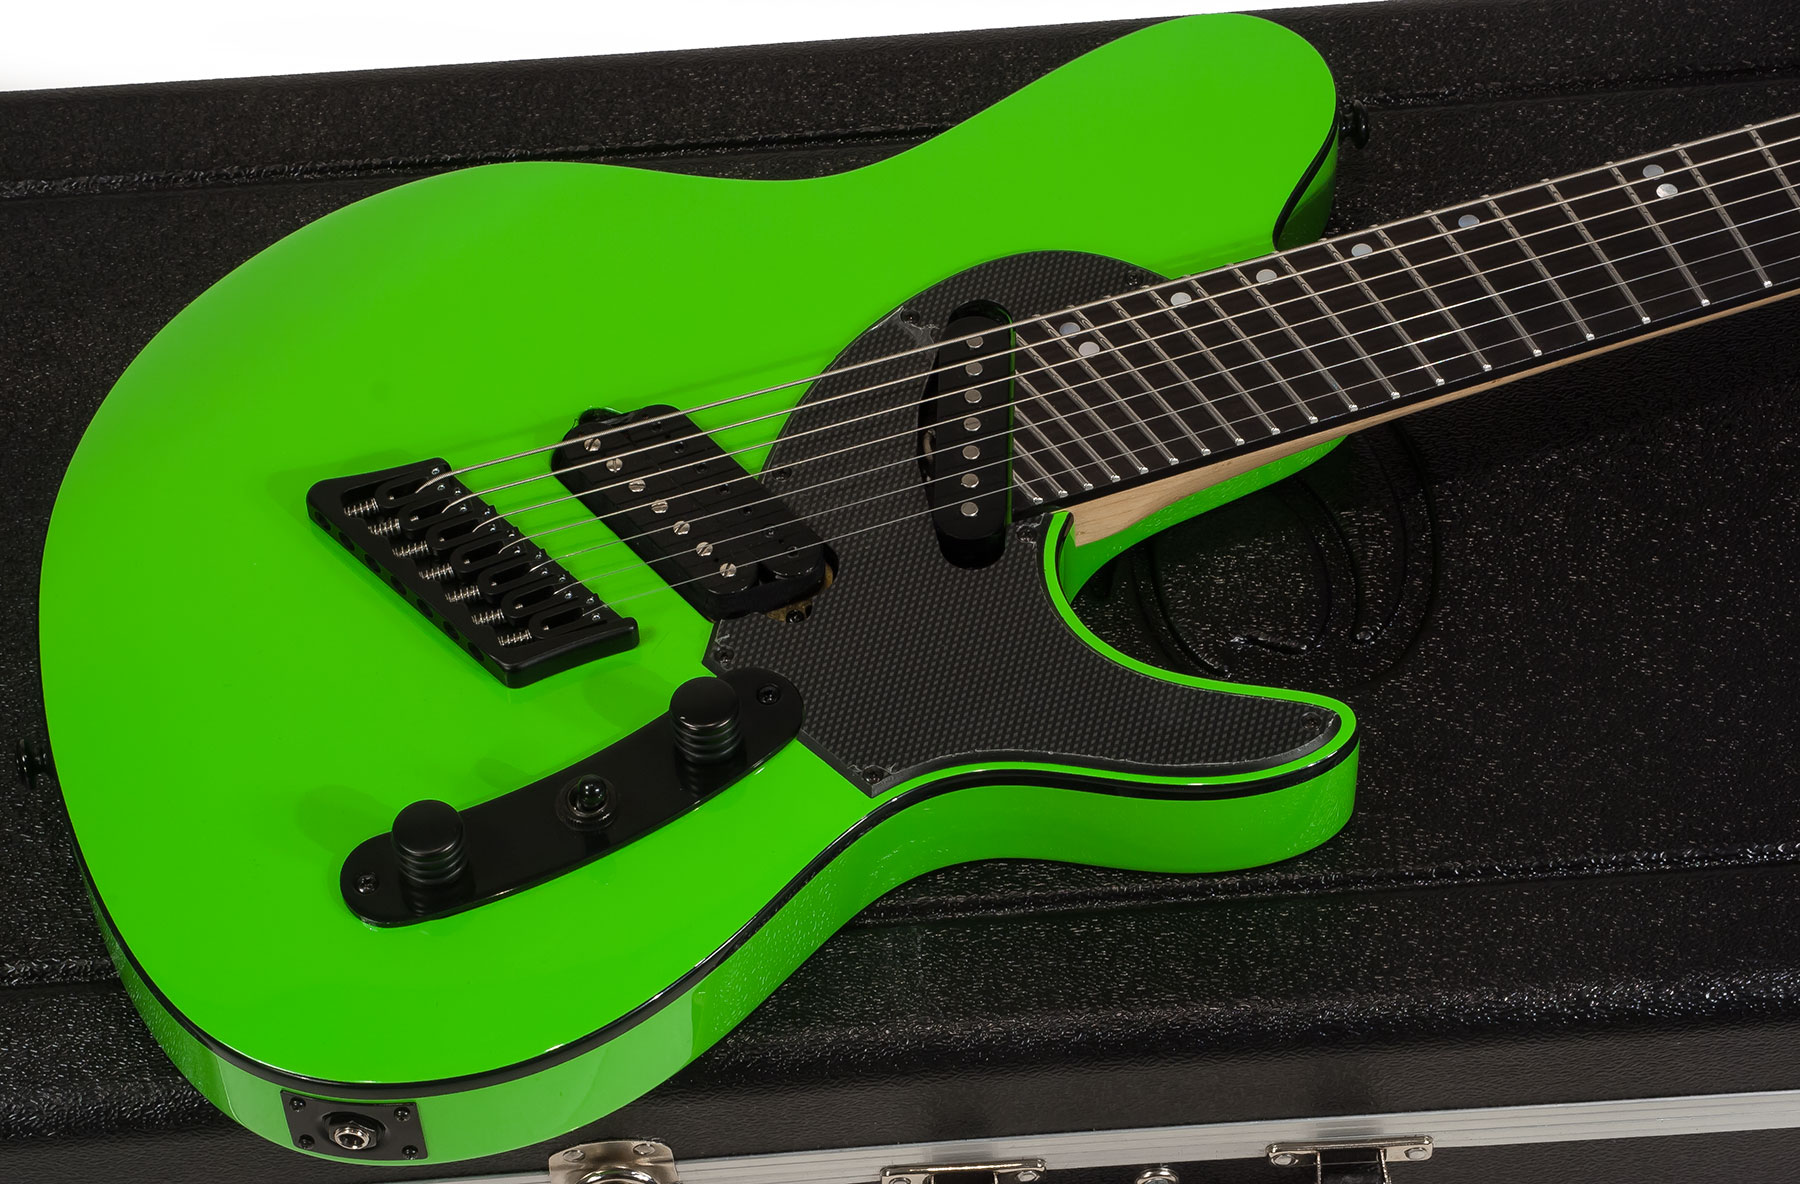 Ormsby Tx Gtr 7 Hs Ht Eb - Chernobyl Green - Multi-Scale Guitar - Variation 1